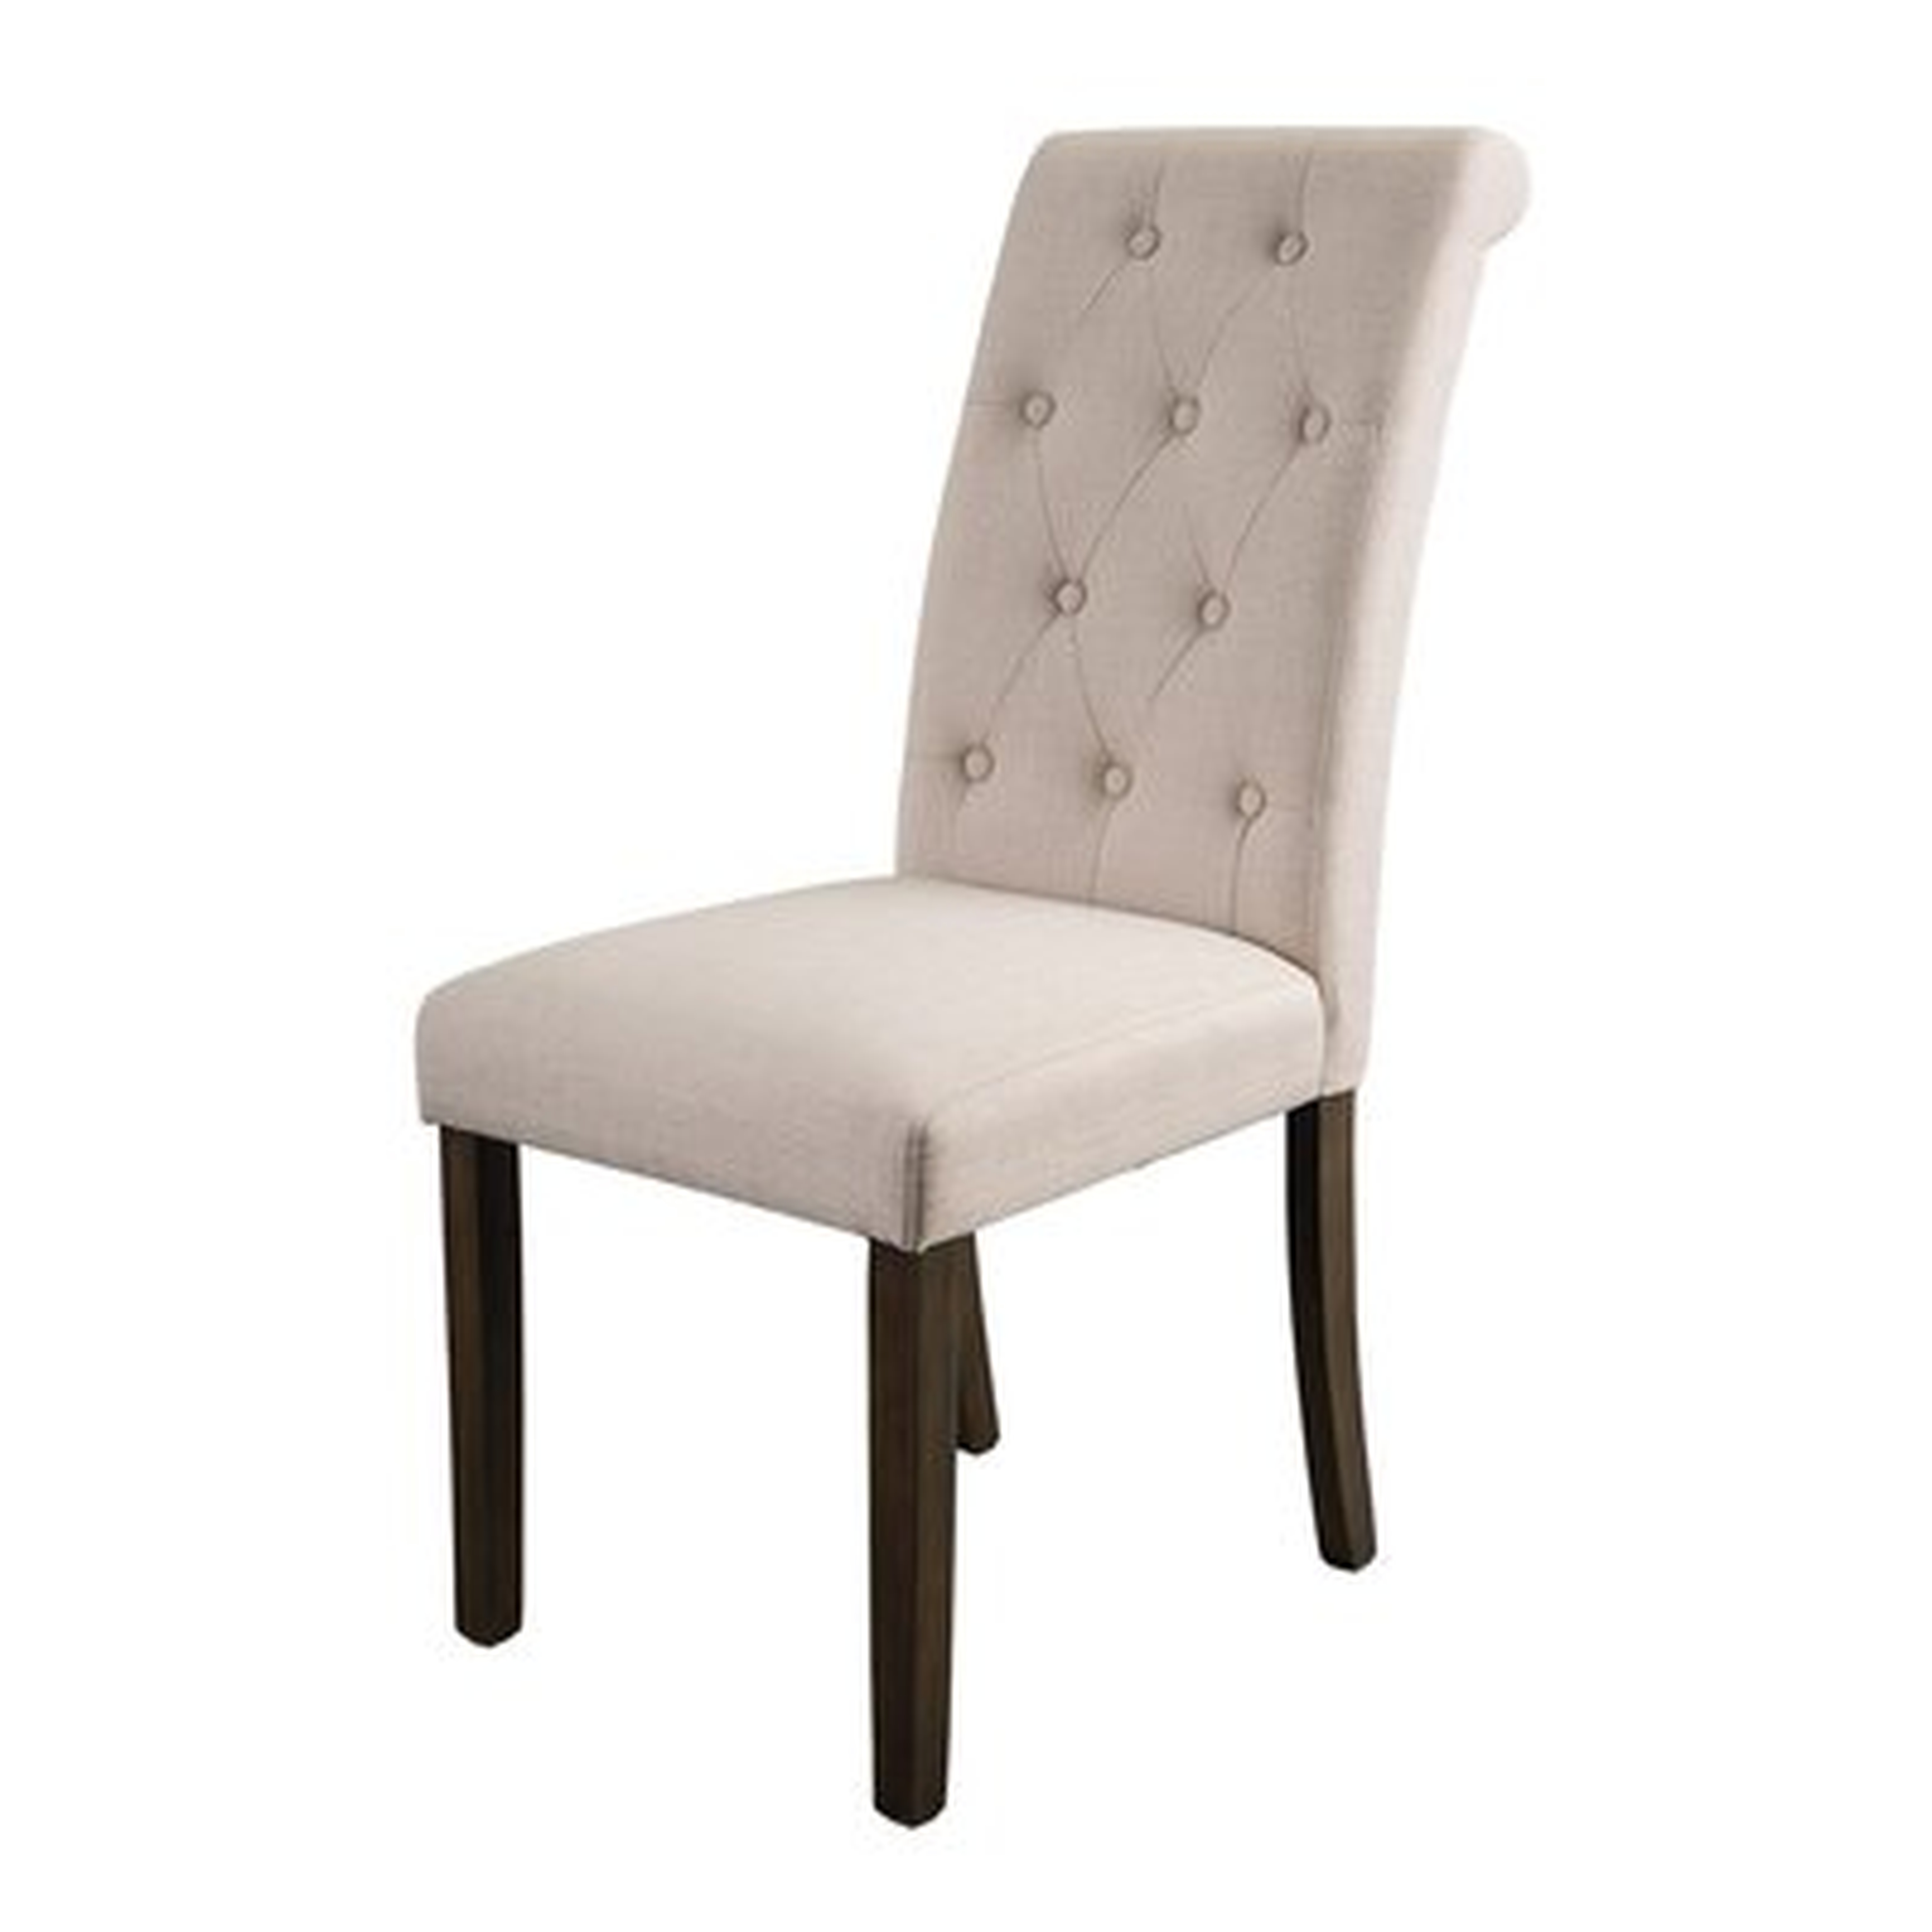 Solid Wood Tufted Dining Chair Set (Set Of 2) - Wayfair